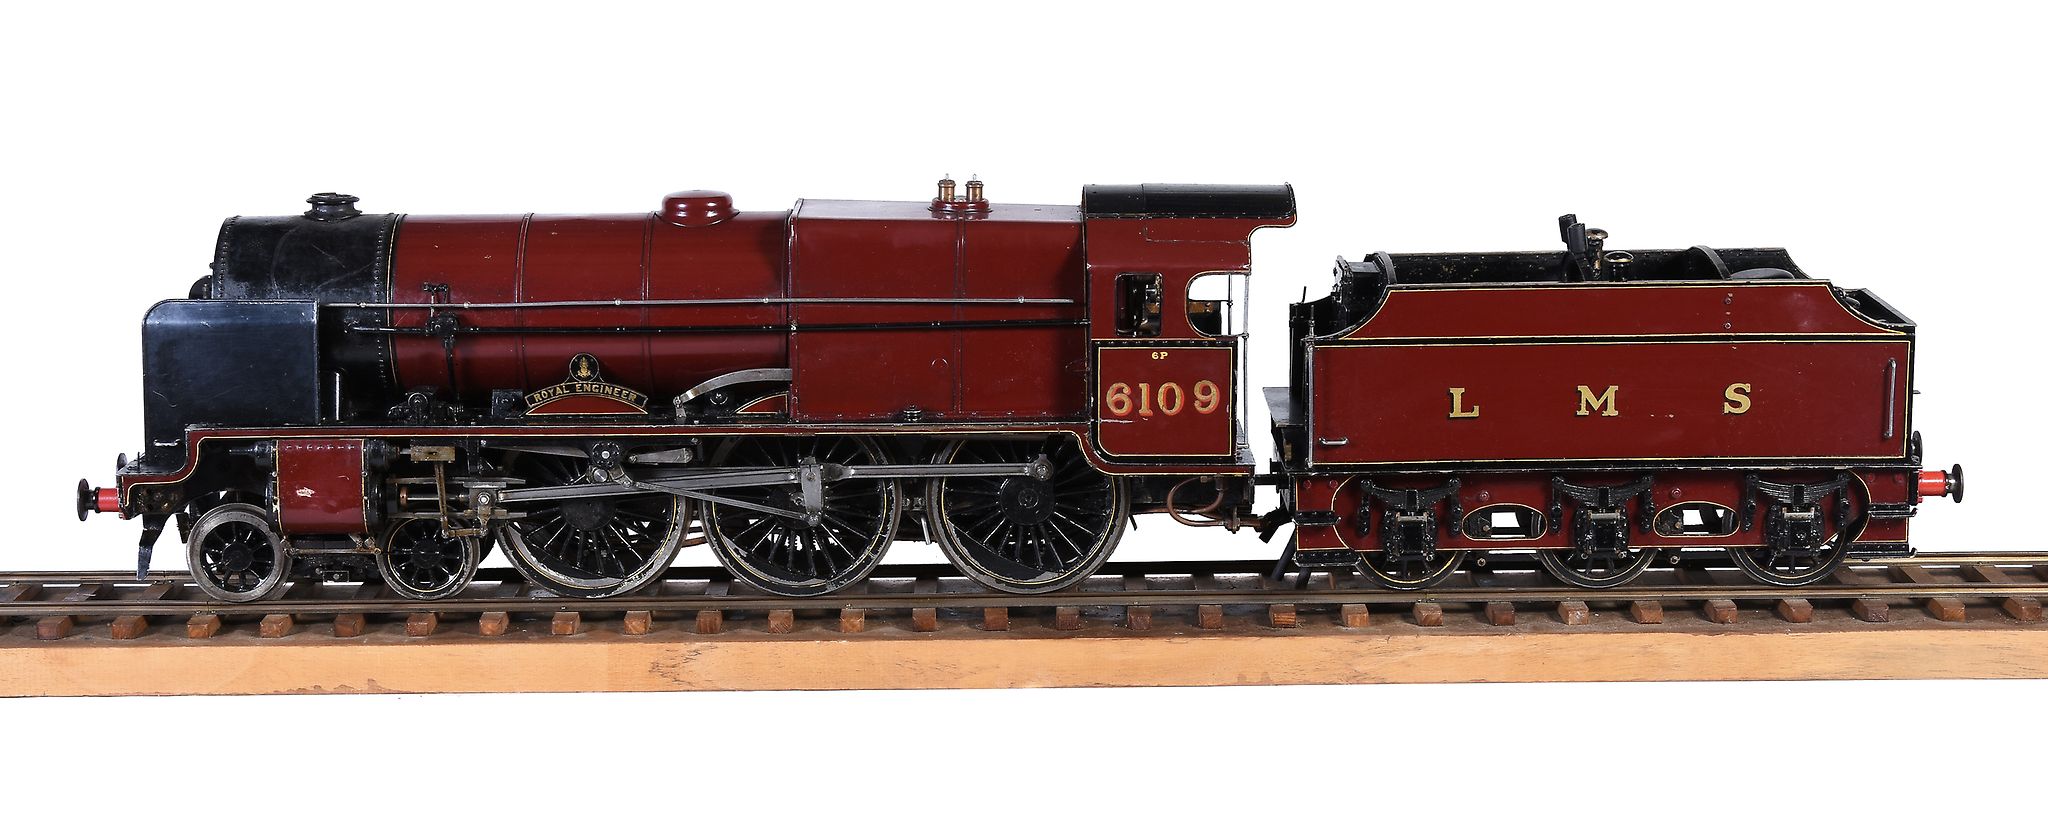 A well engineered 3 1/2 inch gauge model of a 4-6-0 tender locomotive No 6109 Royal Engineer , the